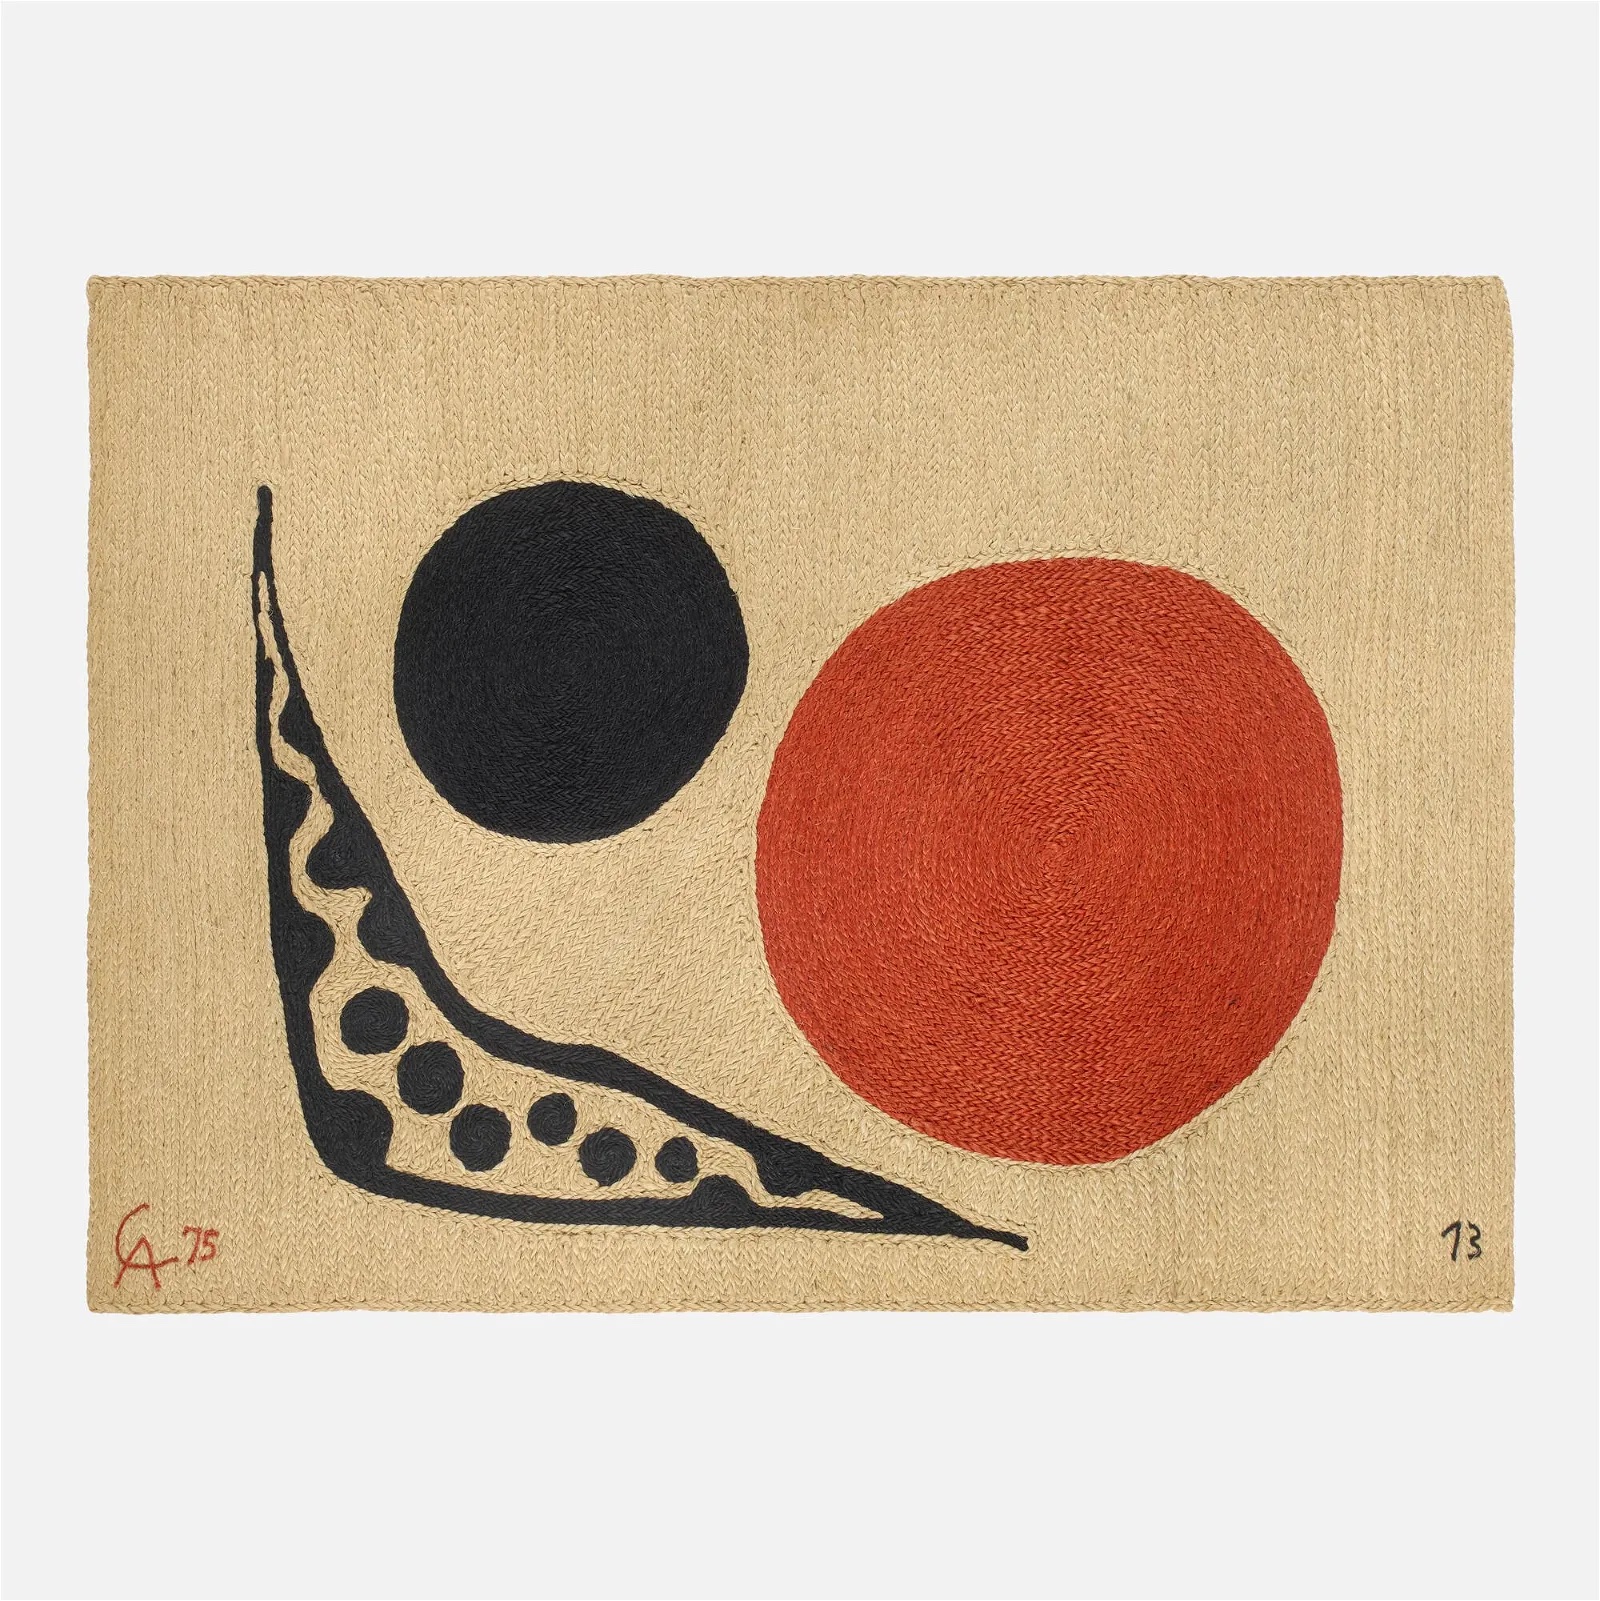 After Alexander Calder, Moon tapestry, which sold for $22,000 ($28,820 with buyer’s premium) at LAMA.